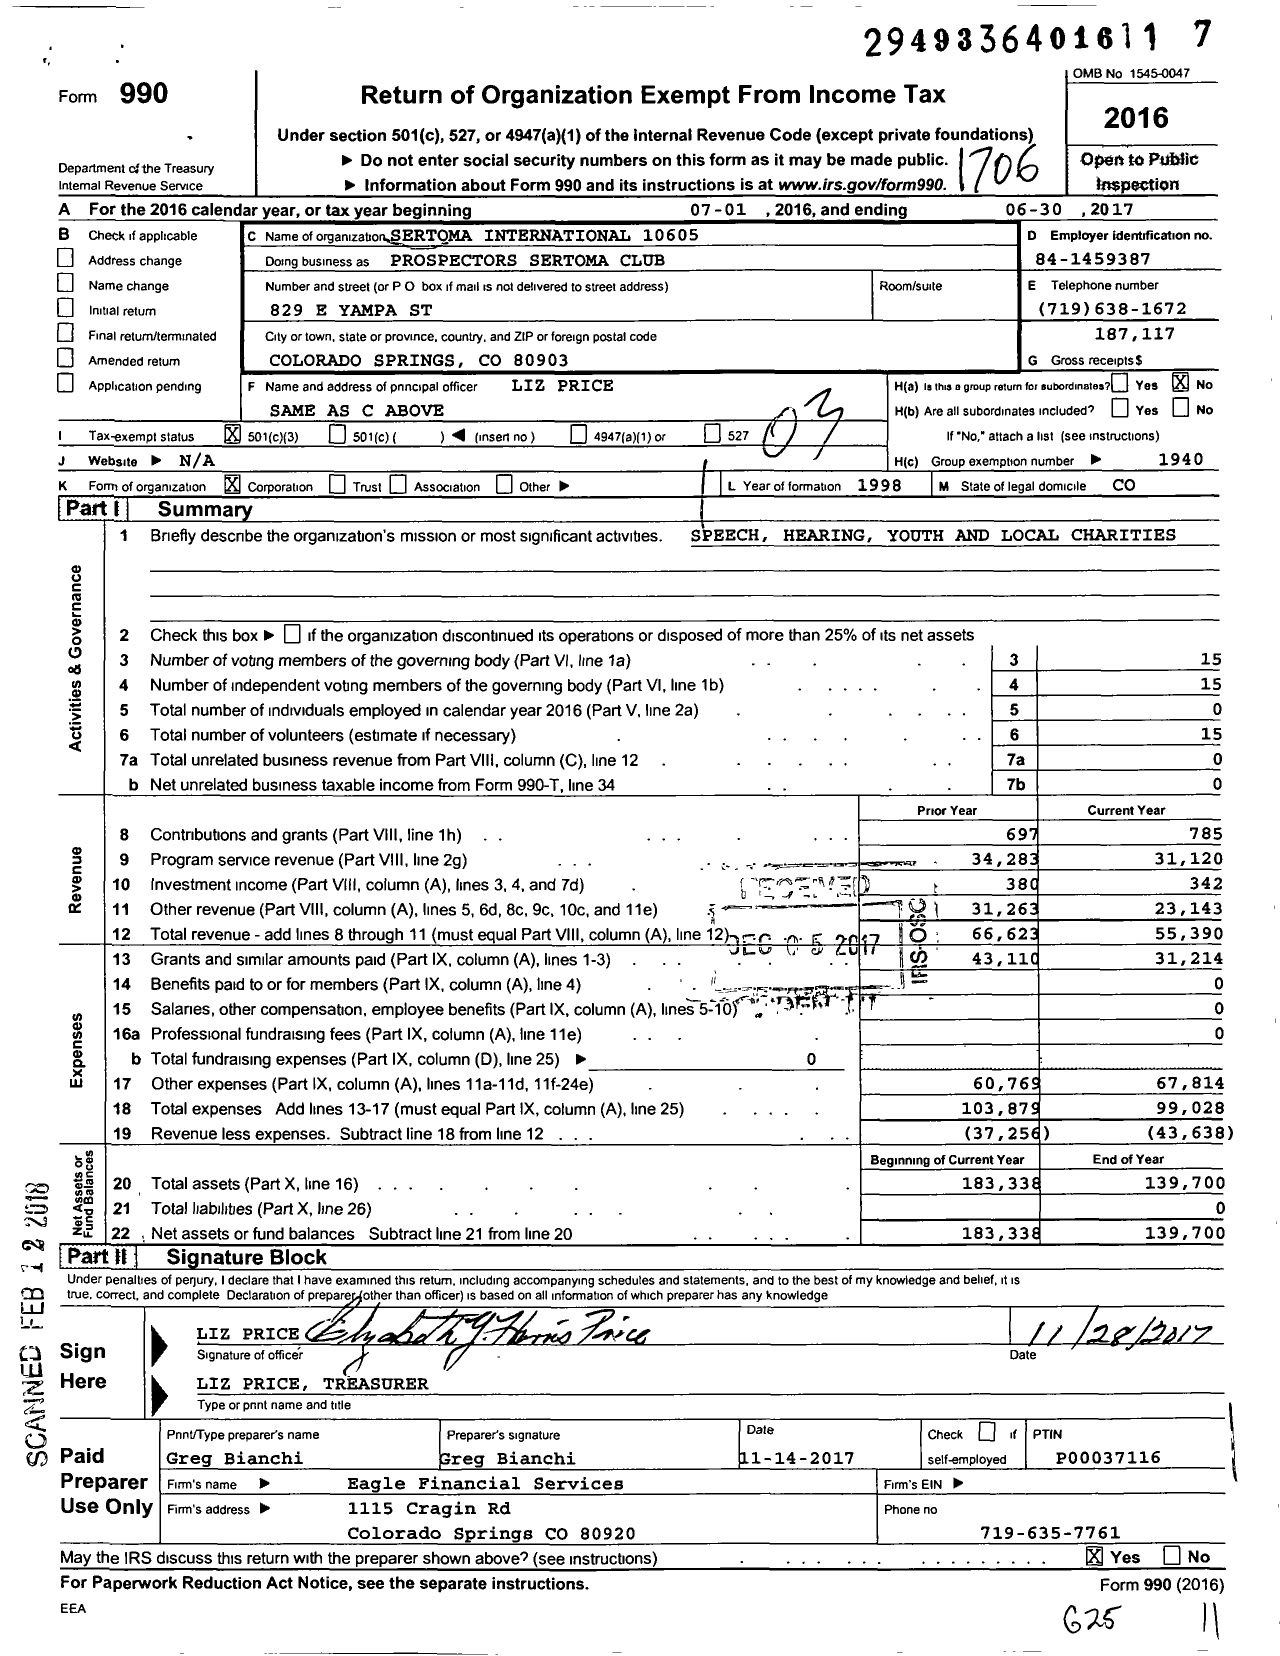 Image of first page of 2016 Form 990 for Sertoma International 10605